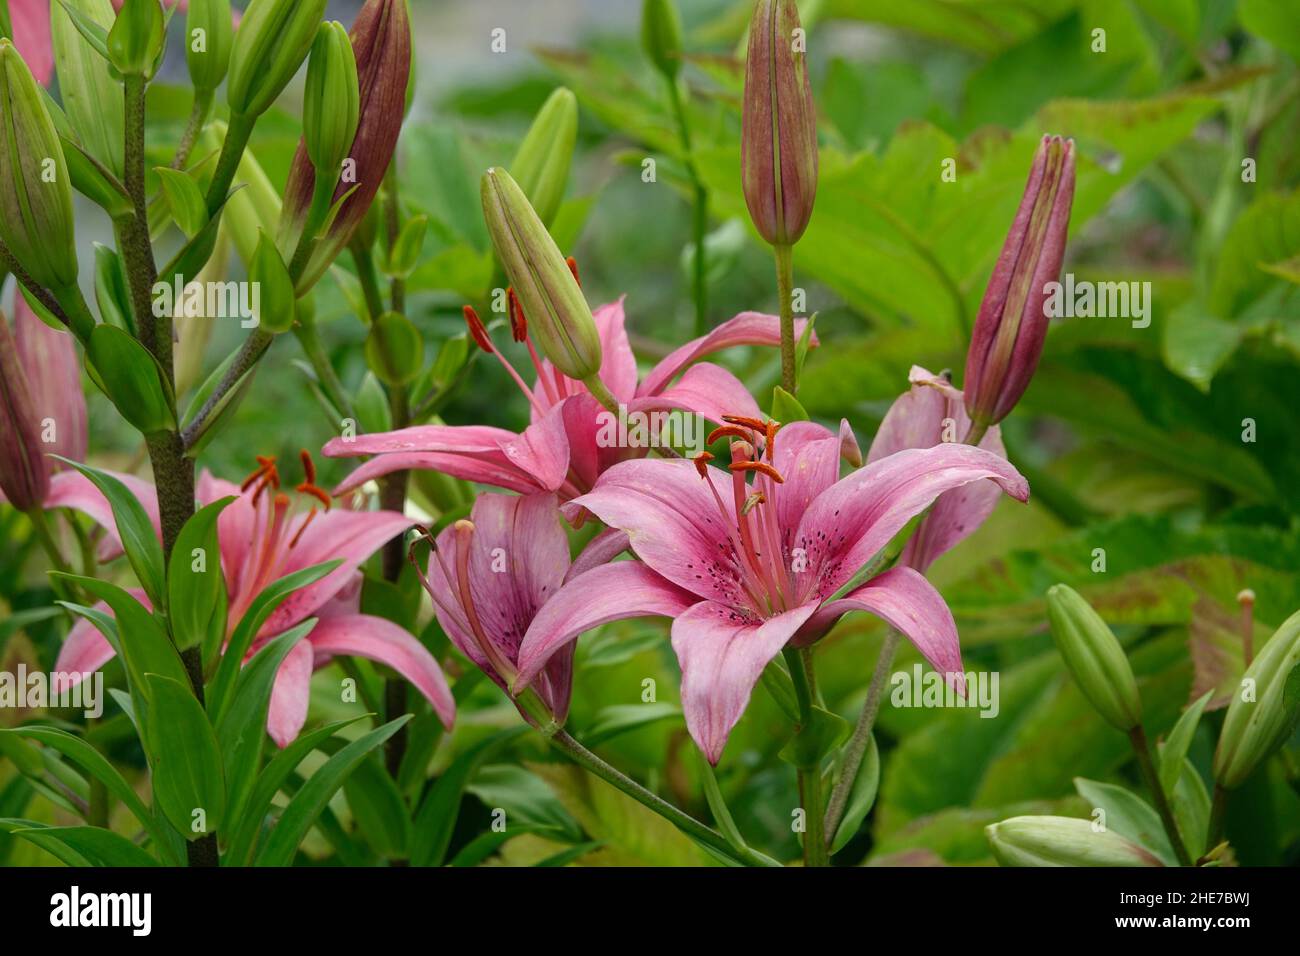 A Cluster of Pink Lilies Flowers, Asiatic Lilies, Hybrid Lily with Dark Pink Spots on the Petals Stock Photo